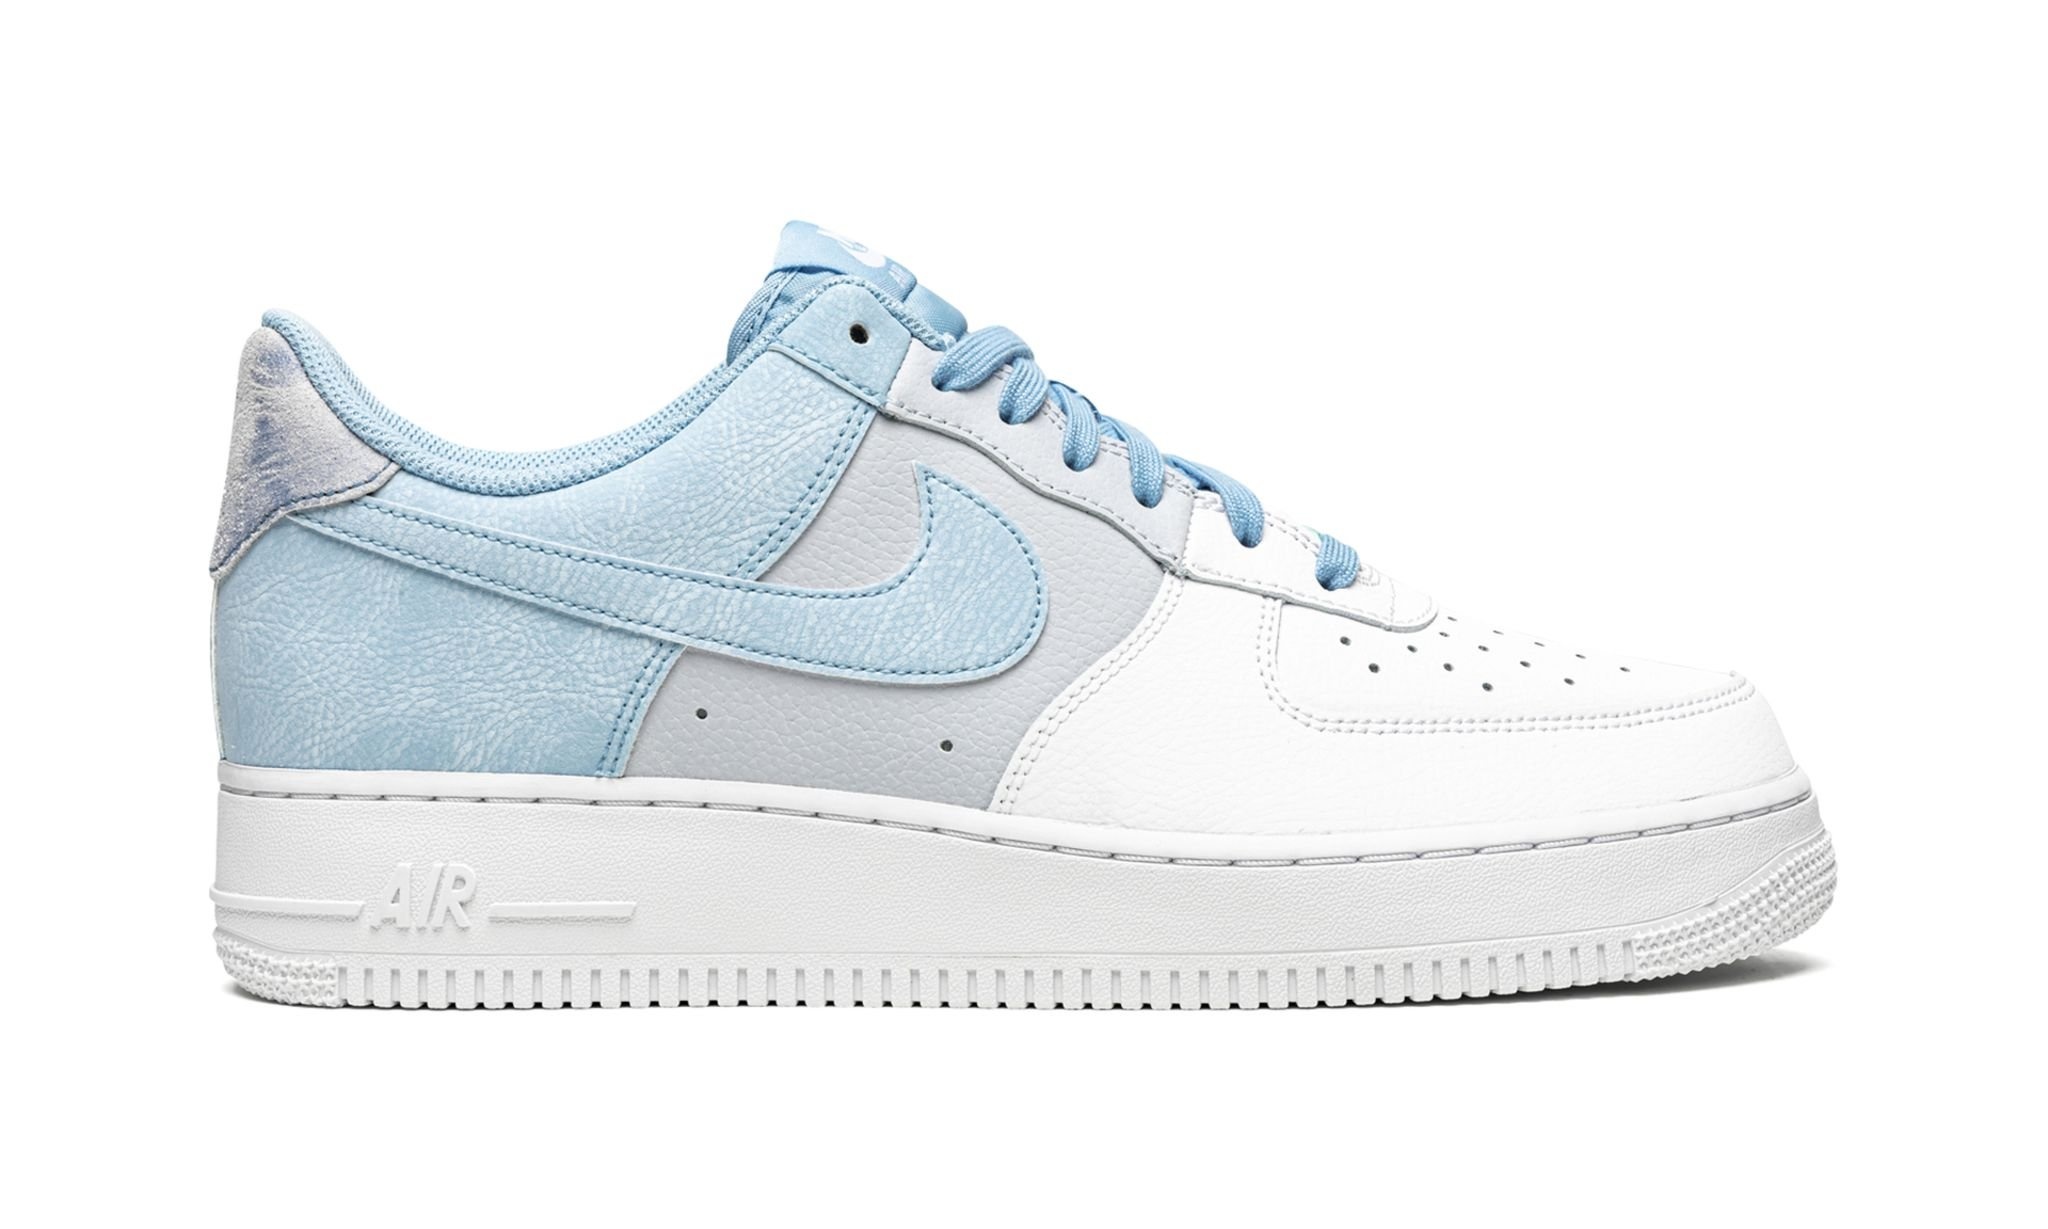 Air Force 1 '07 LV8 "Psychic Blue" - 6